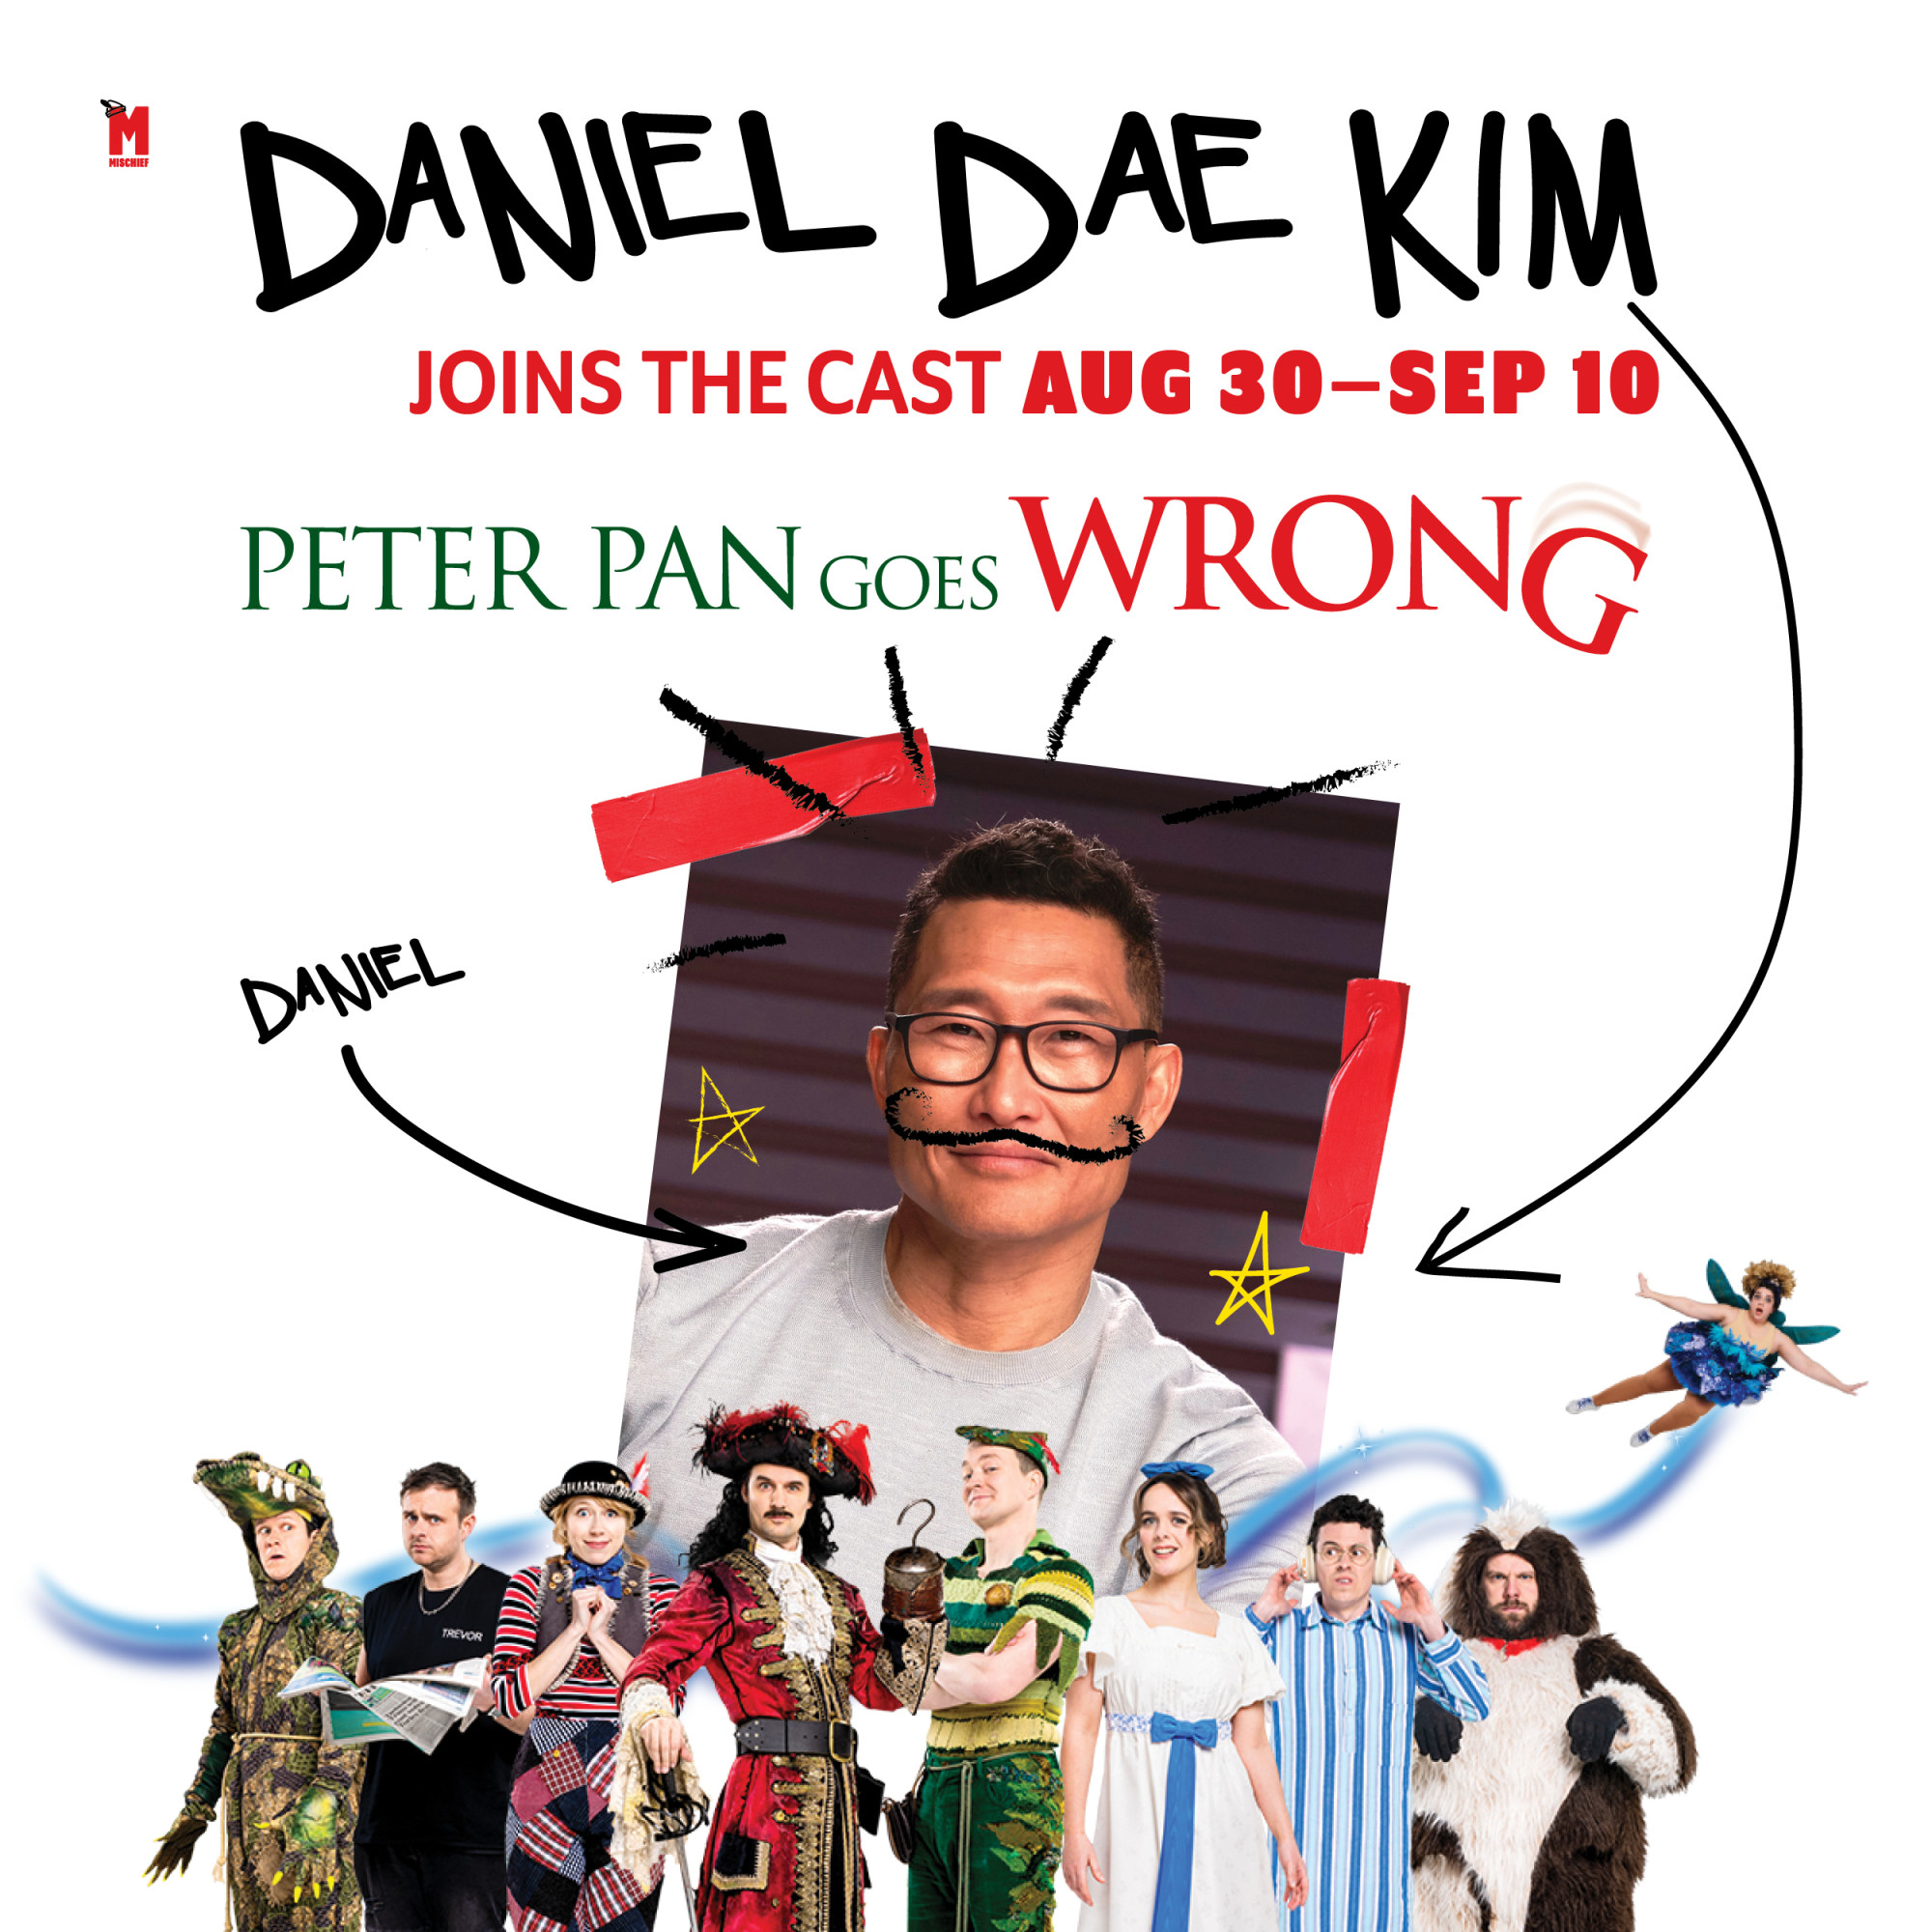 Tickets for all-new production of Peter Pan go on sale 10/6